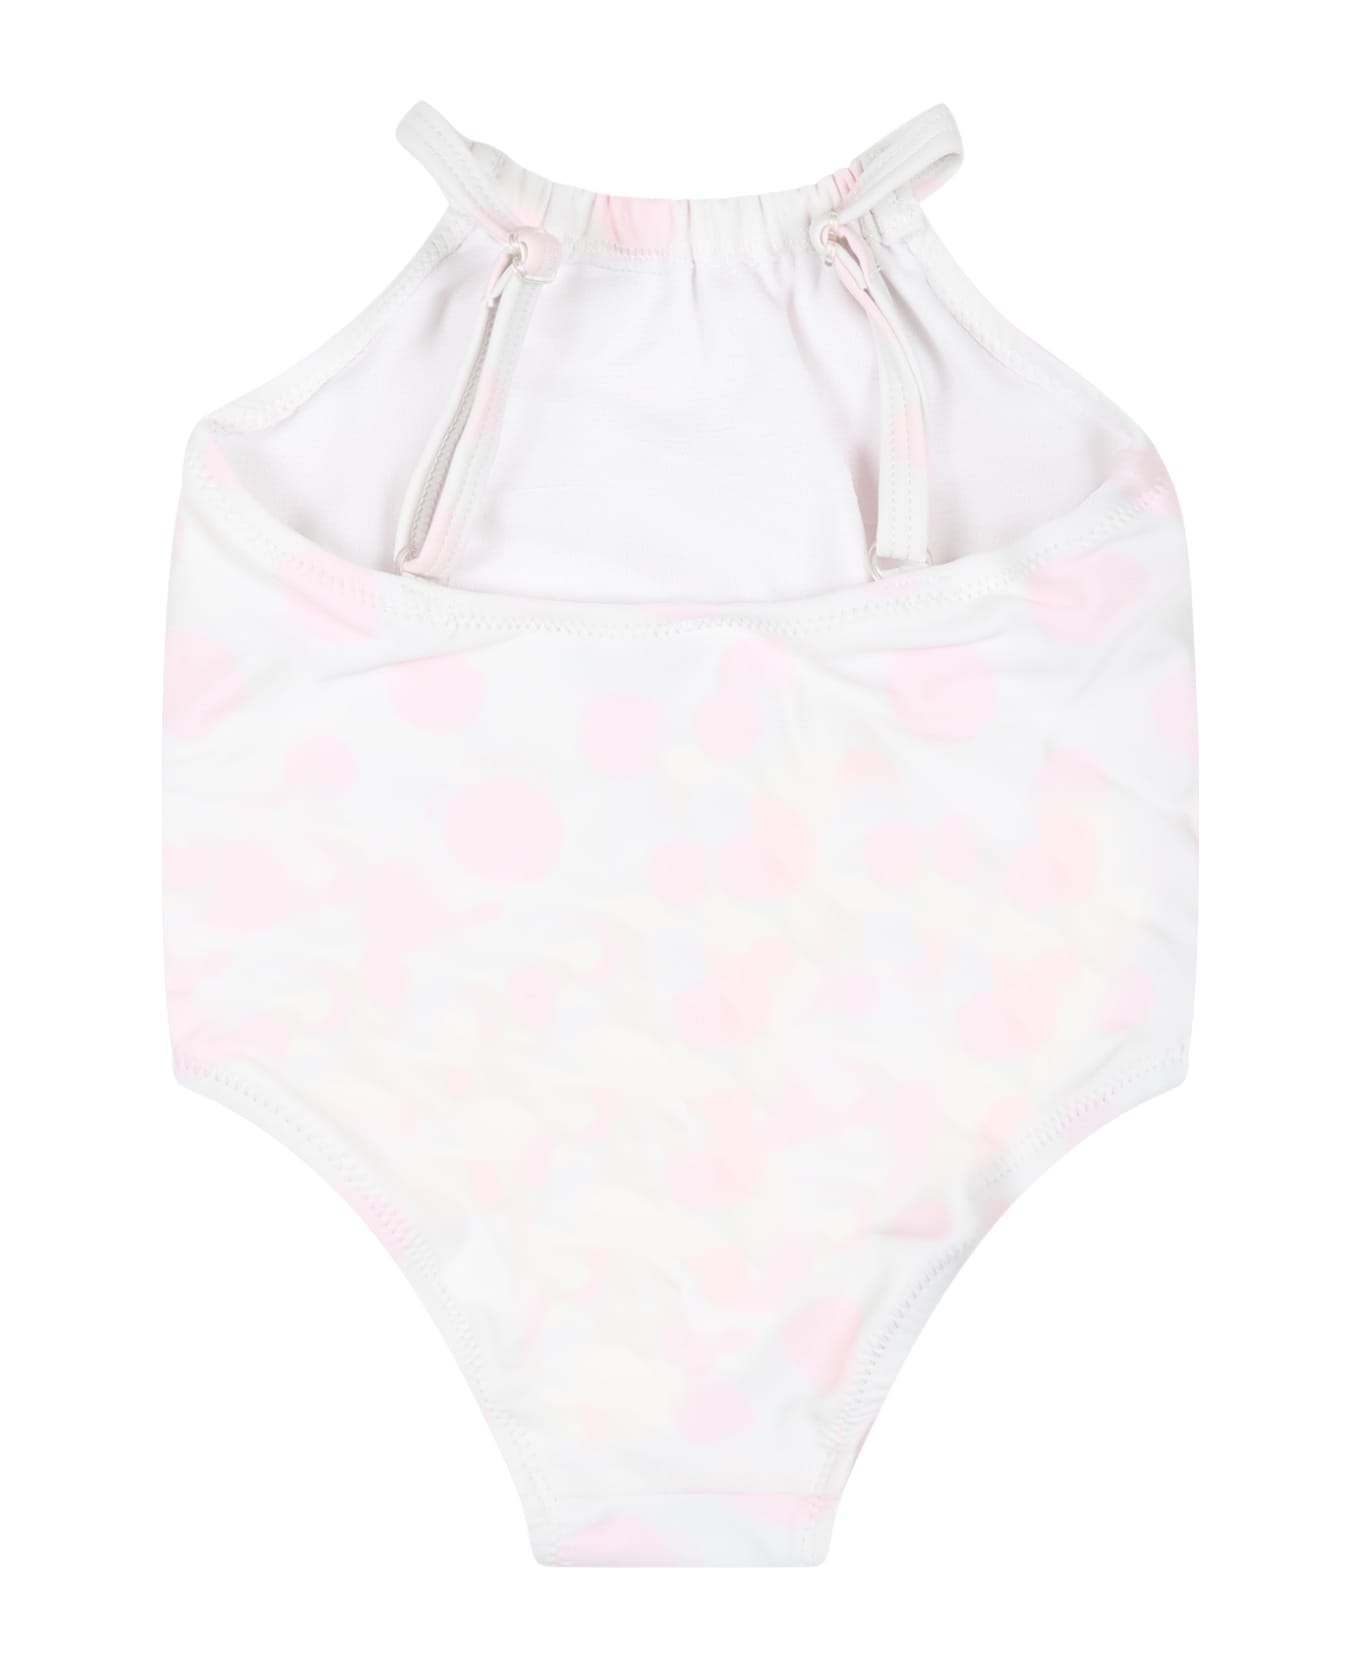 Marc Jacobs White One-piece Swimsuit For Baby Girl With Polka Dot Pattern - White 水着